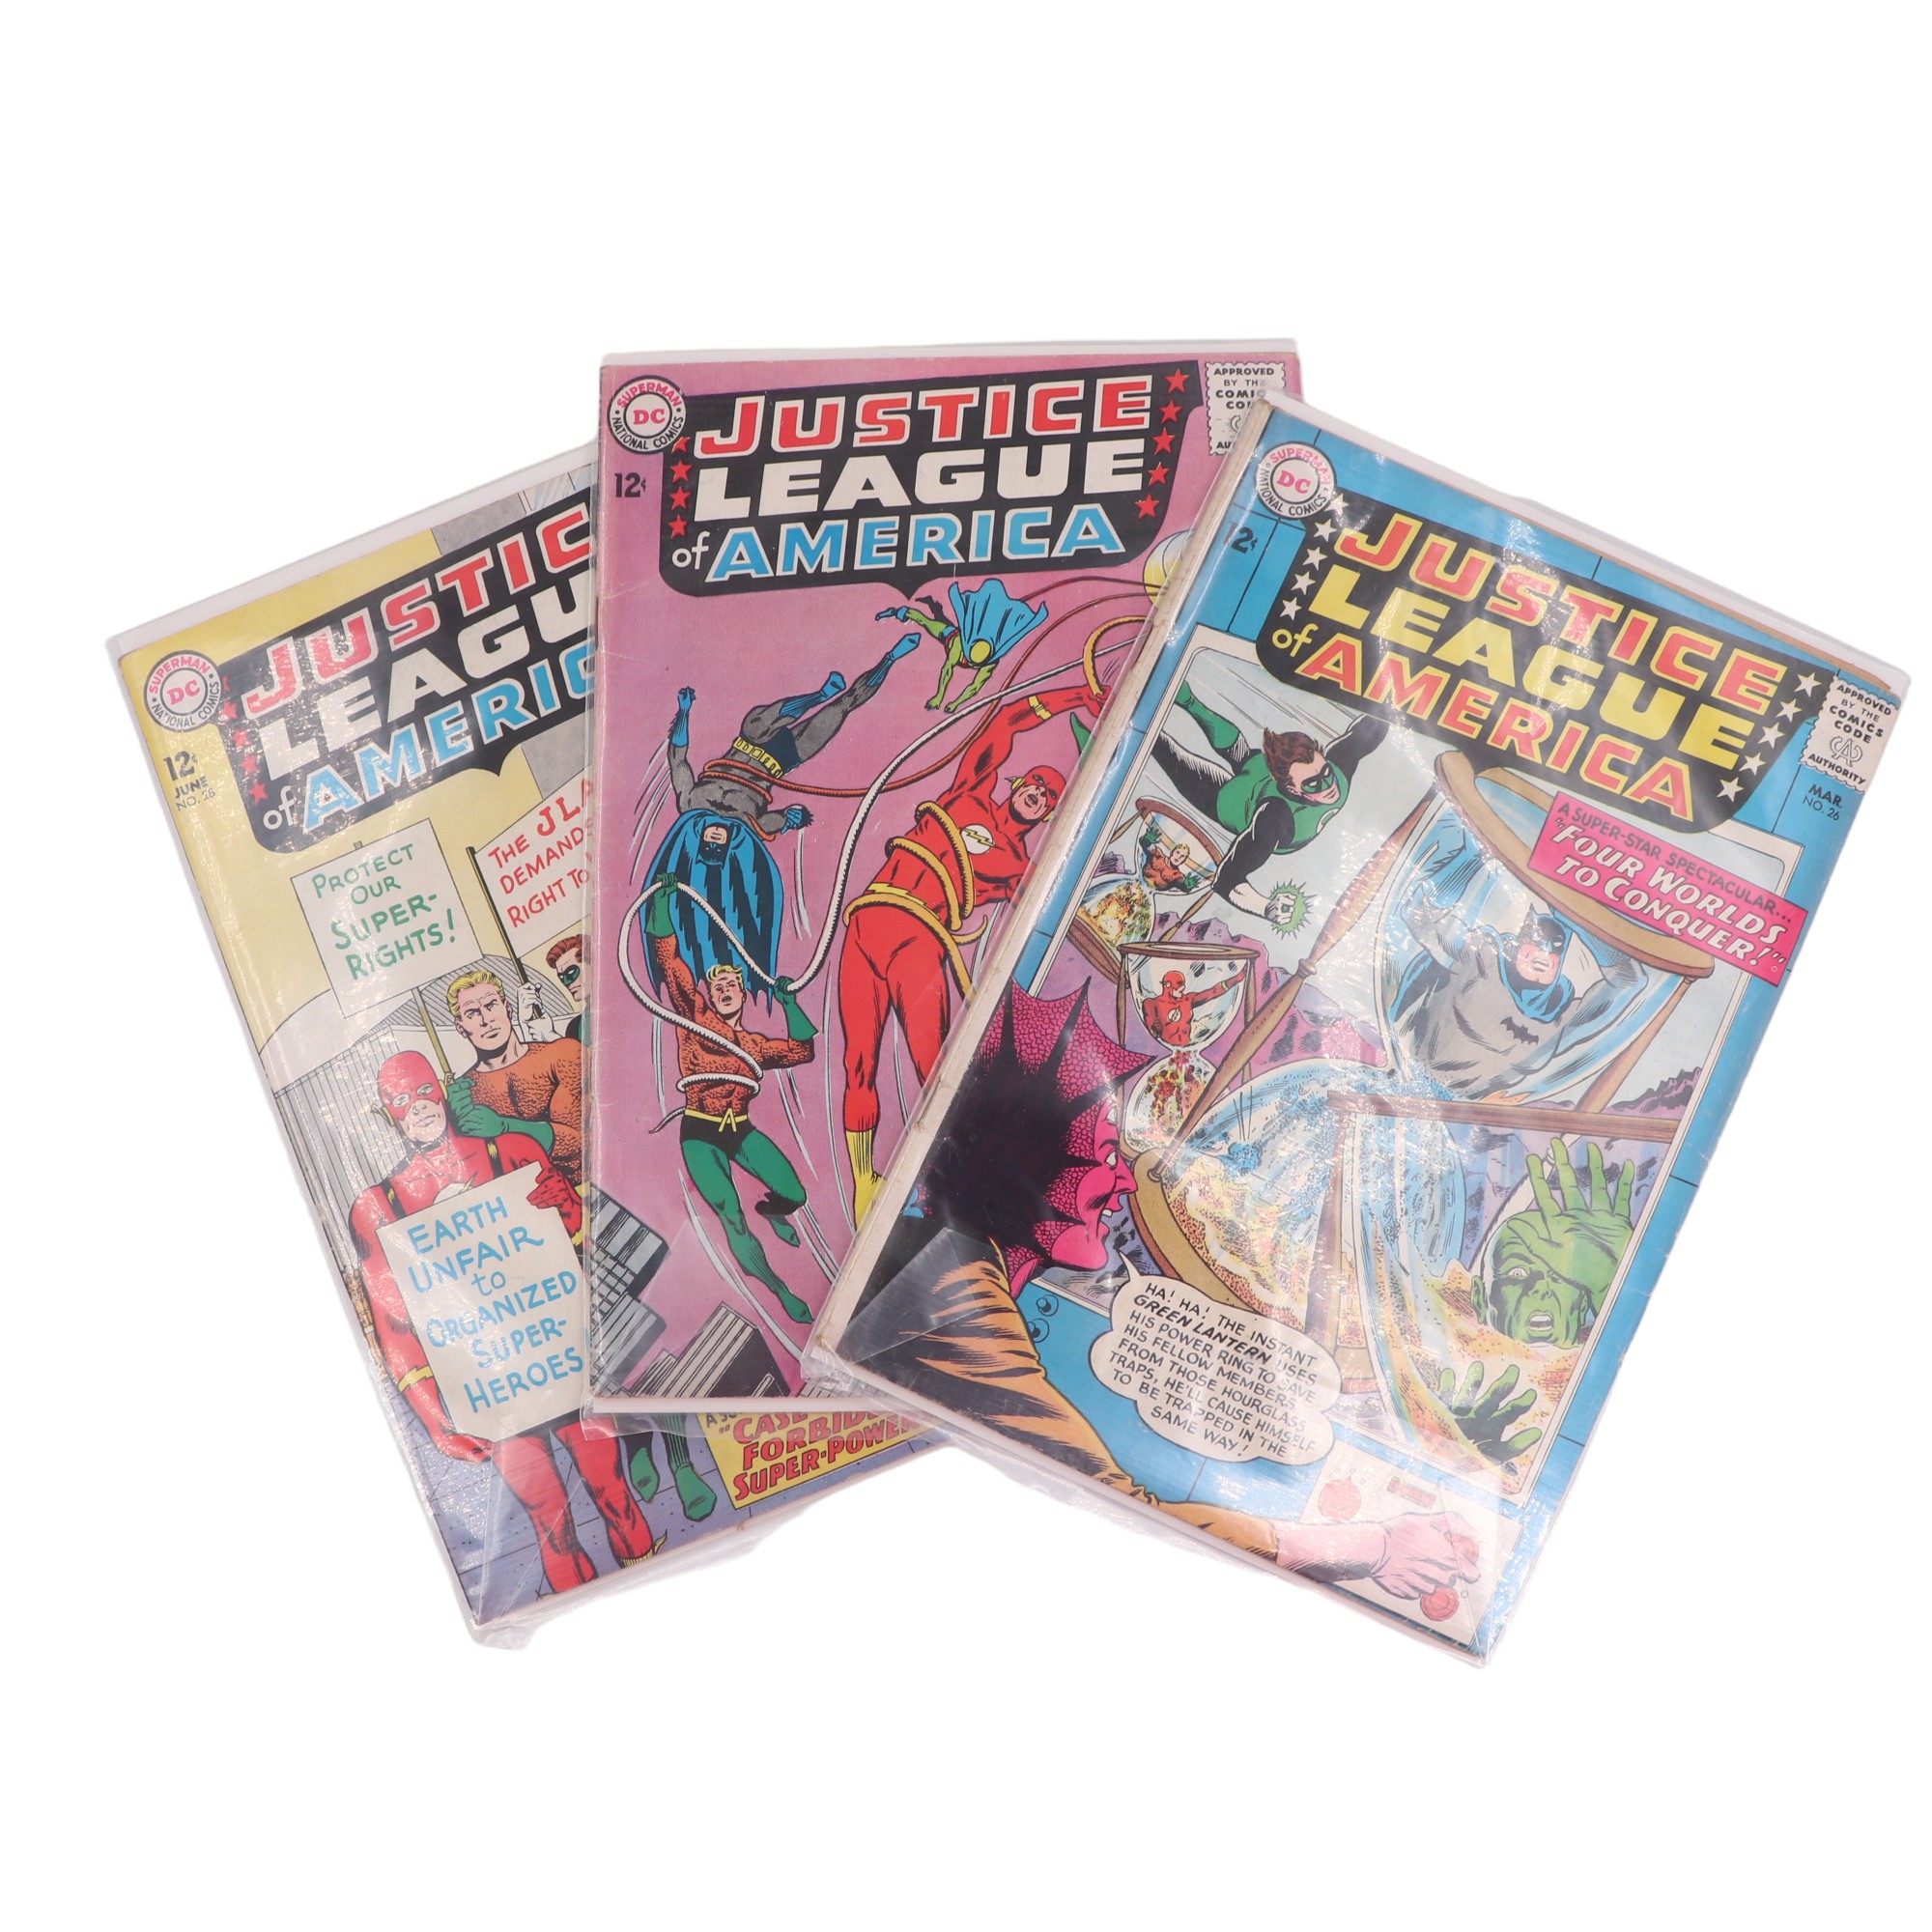 A large quantity of 1960s DC Justice League of America comic books, issue numbers 3 to 36 (not - Image 2 of 4